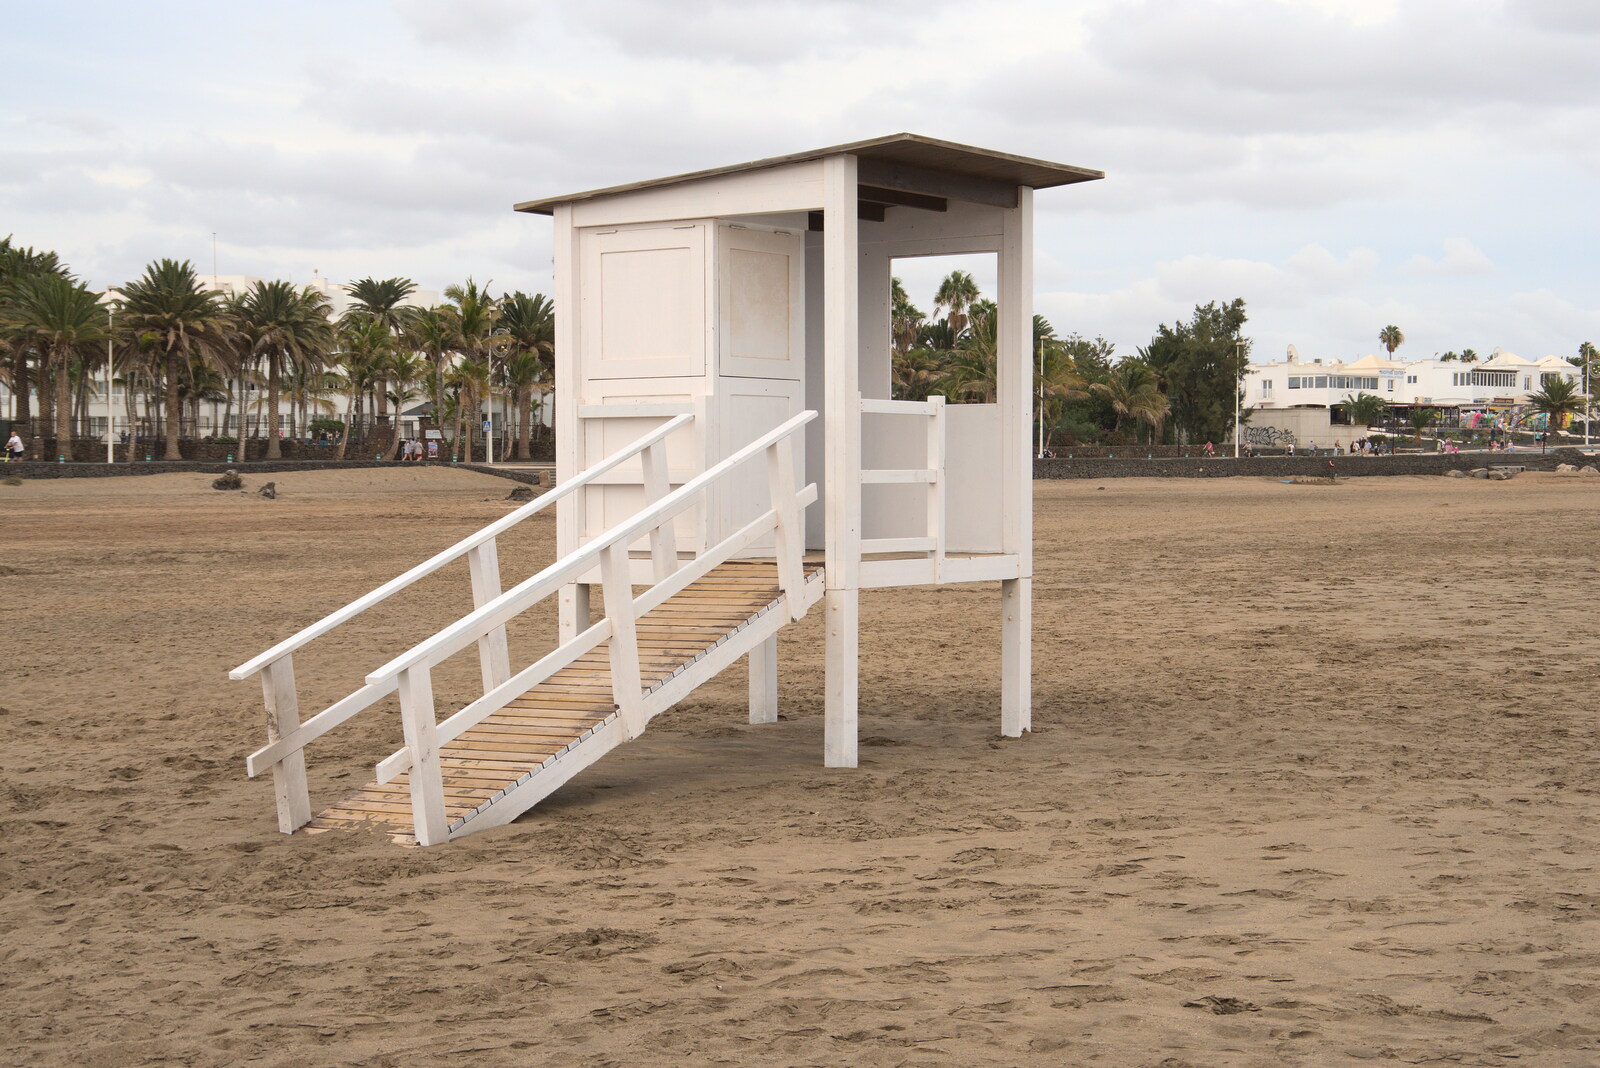 A lifeguard hut on the Playa de los Pocillos from Five Days in Lanzarote, Canary Islands, Spain - 24th October 2021